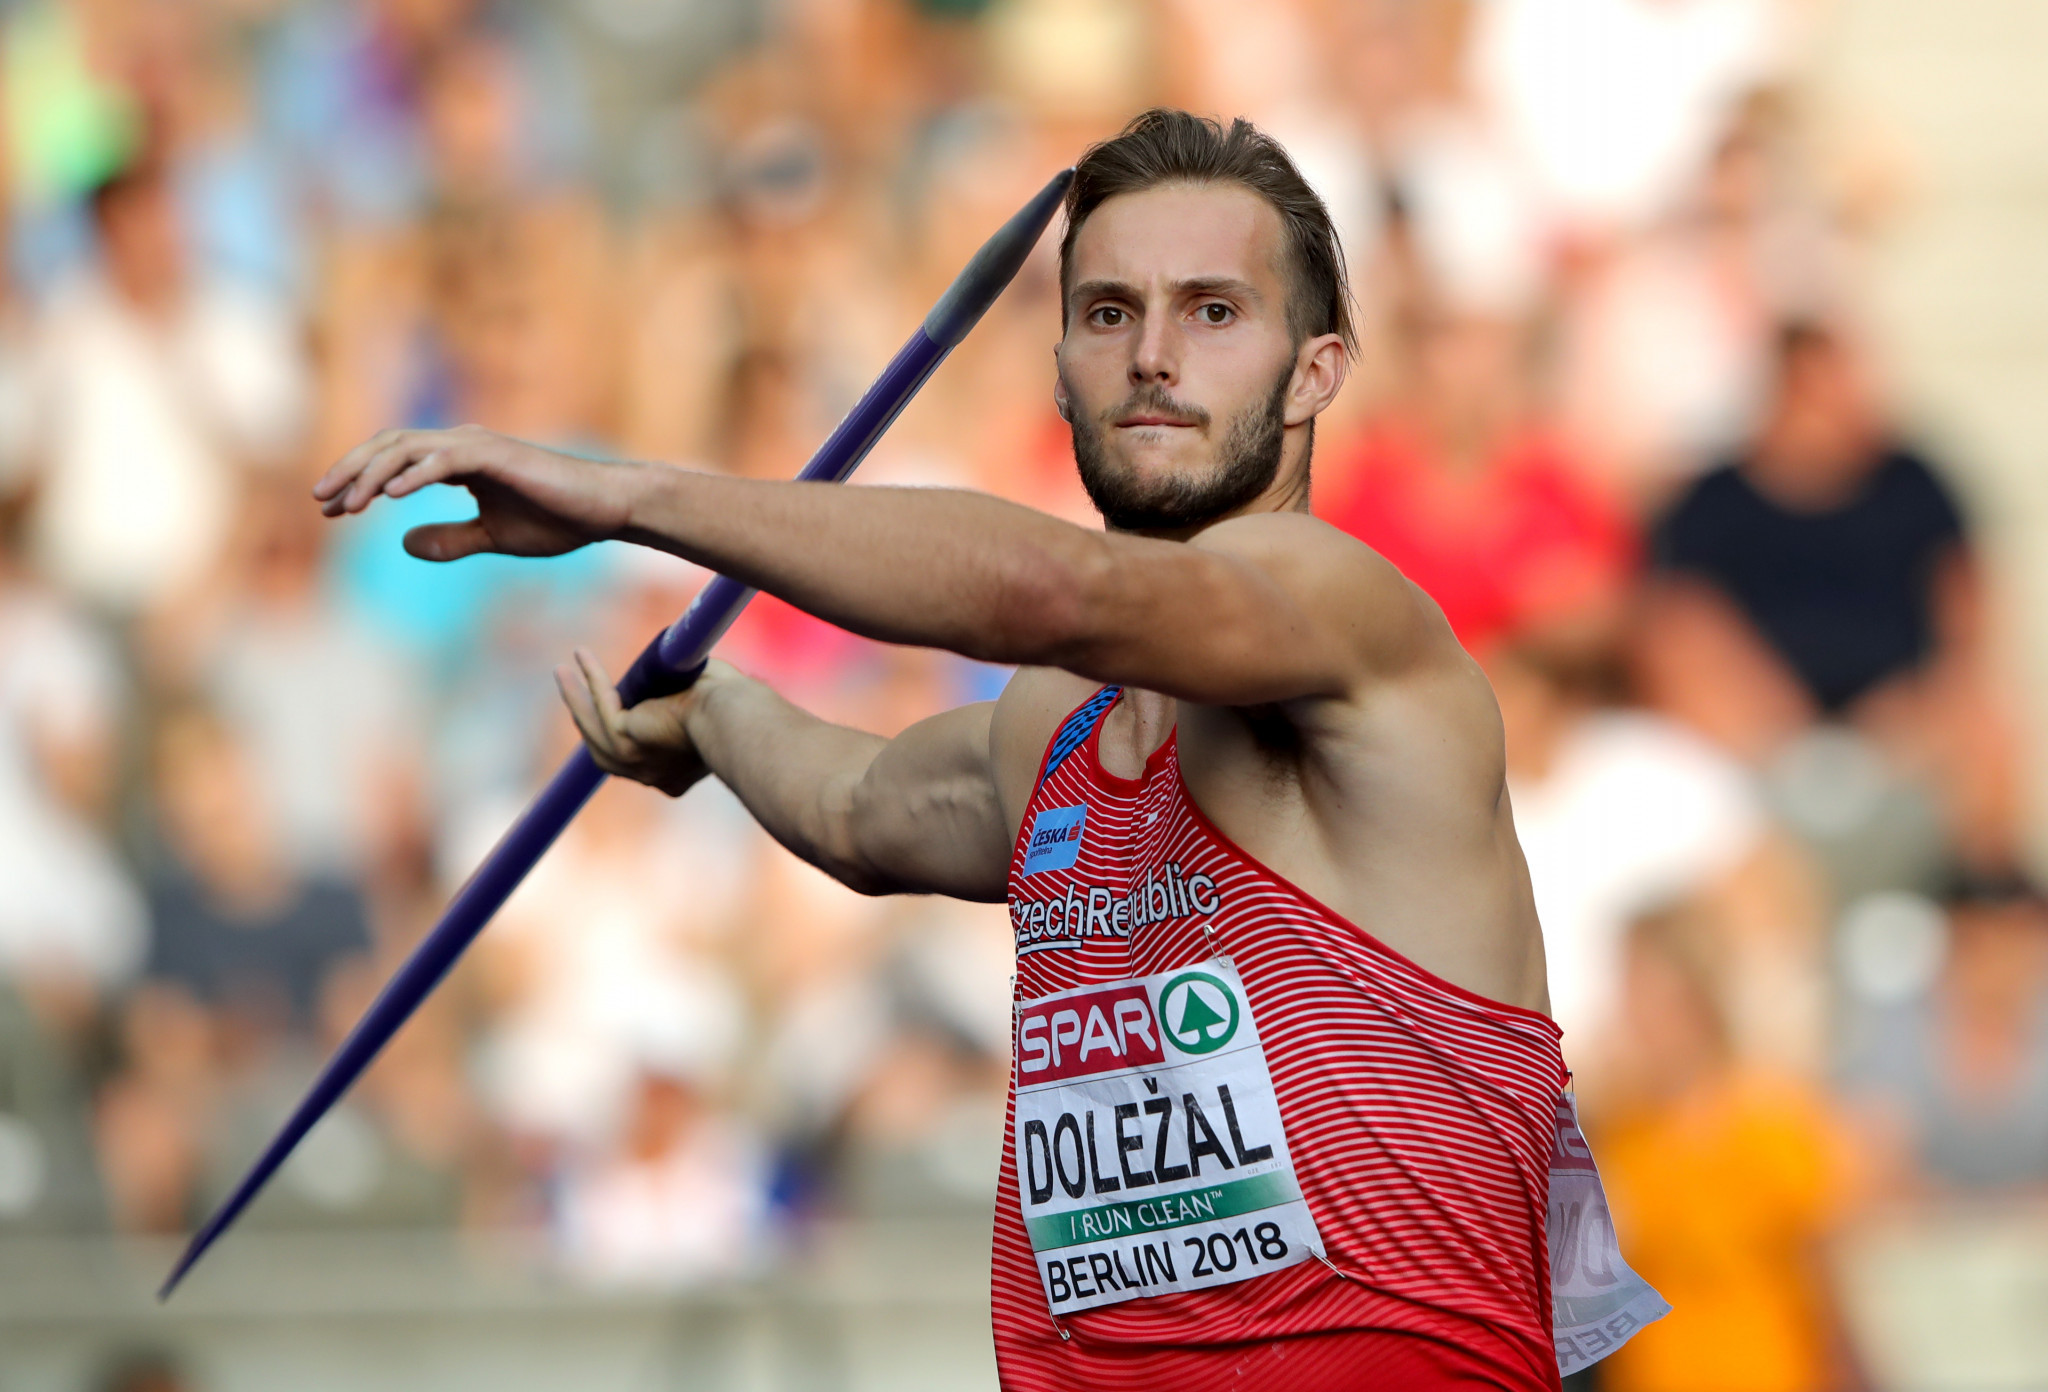 Czech athlete Jan Doležal won the opening leg of this season's IAAF Combined Events Challenge in Italy today ©Getty Images